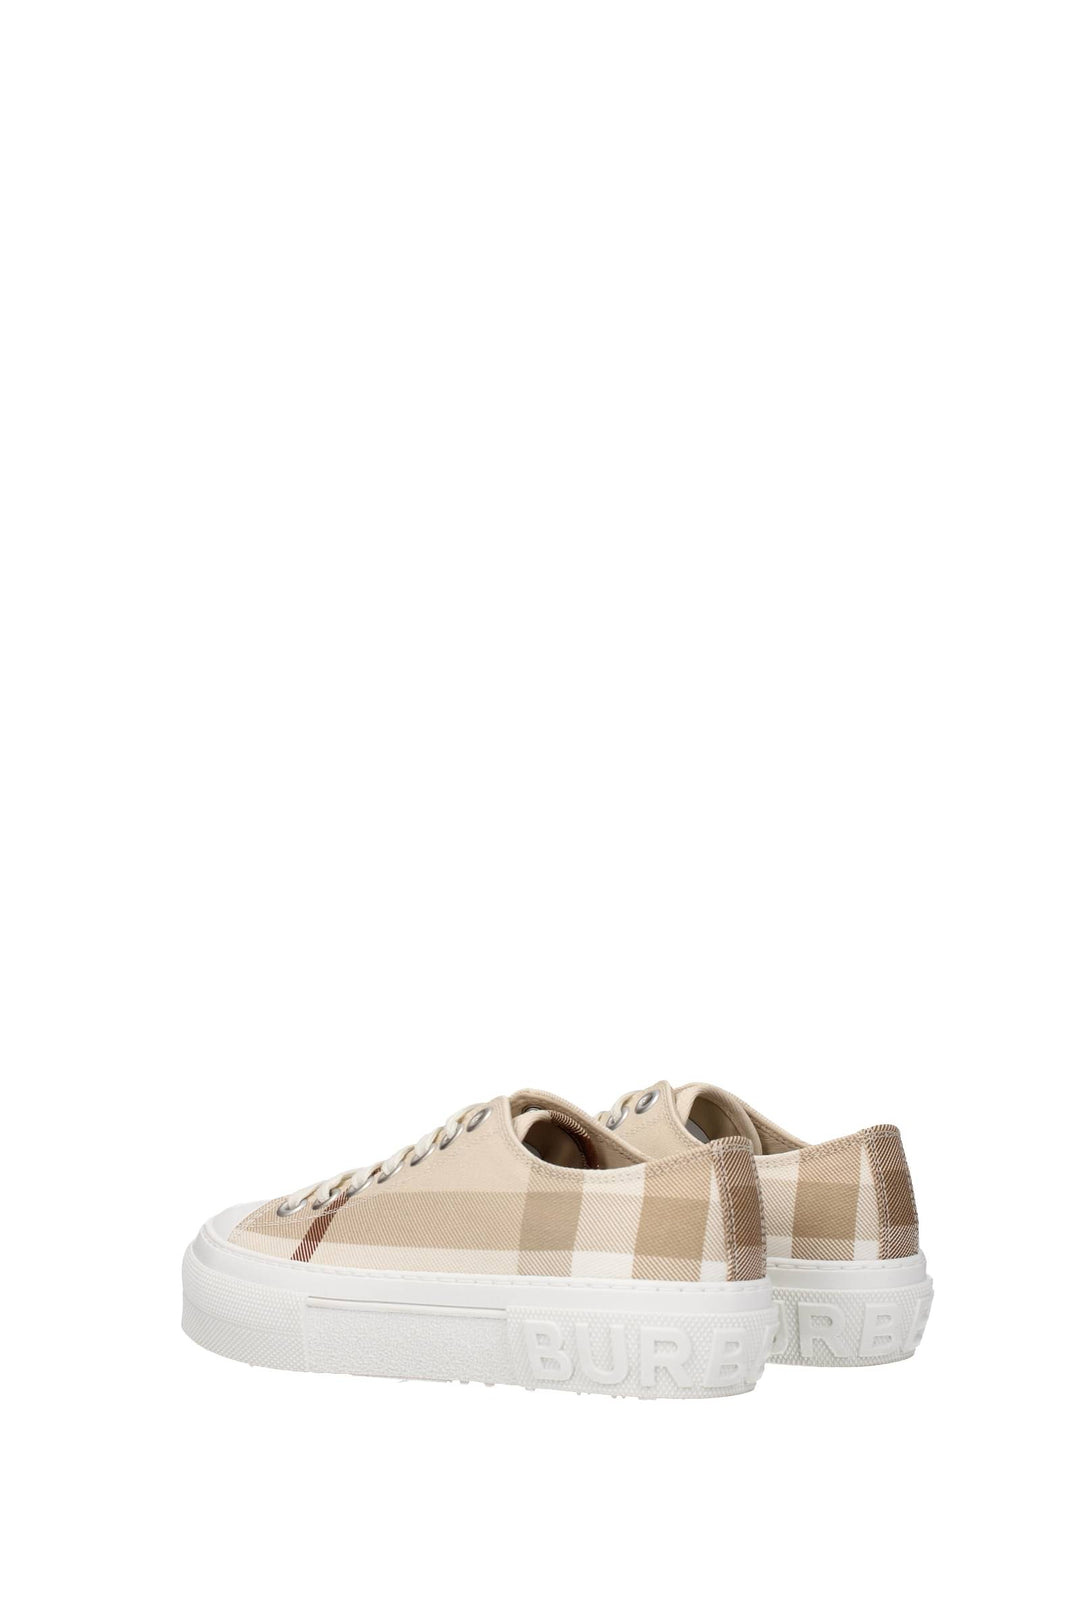 Sneakers Cotone Beige Fawn - Burberry - Donna